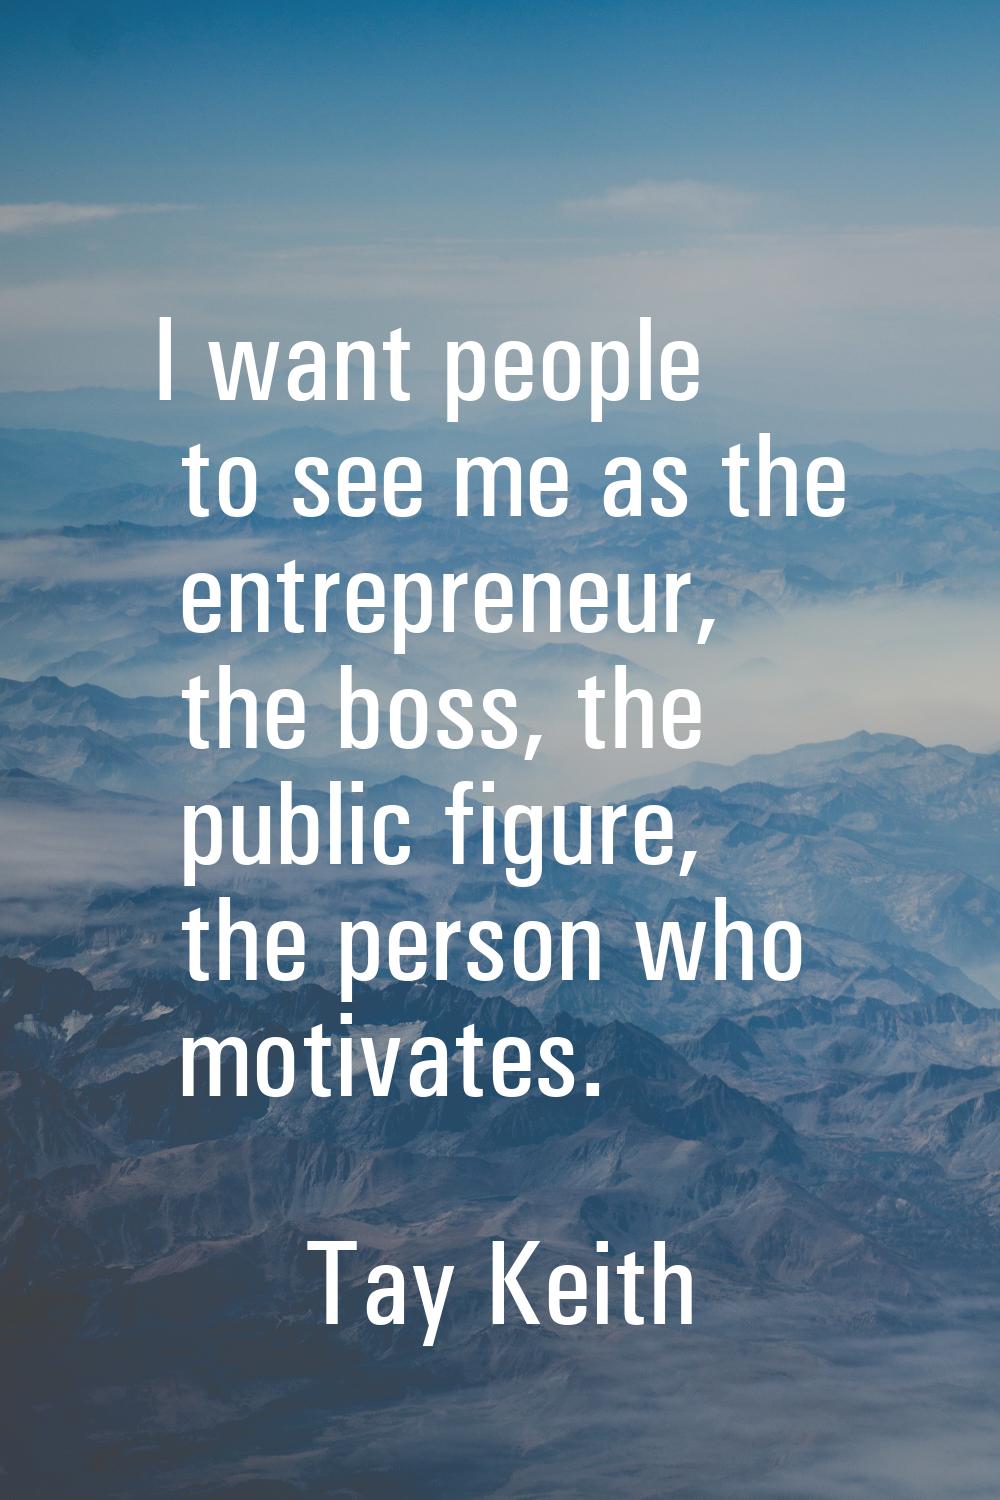 I want people to see me as the entrepreneur, the boss, the public figure, the person who motivates.